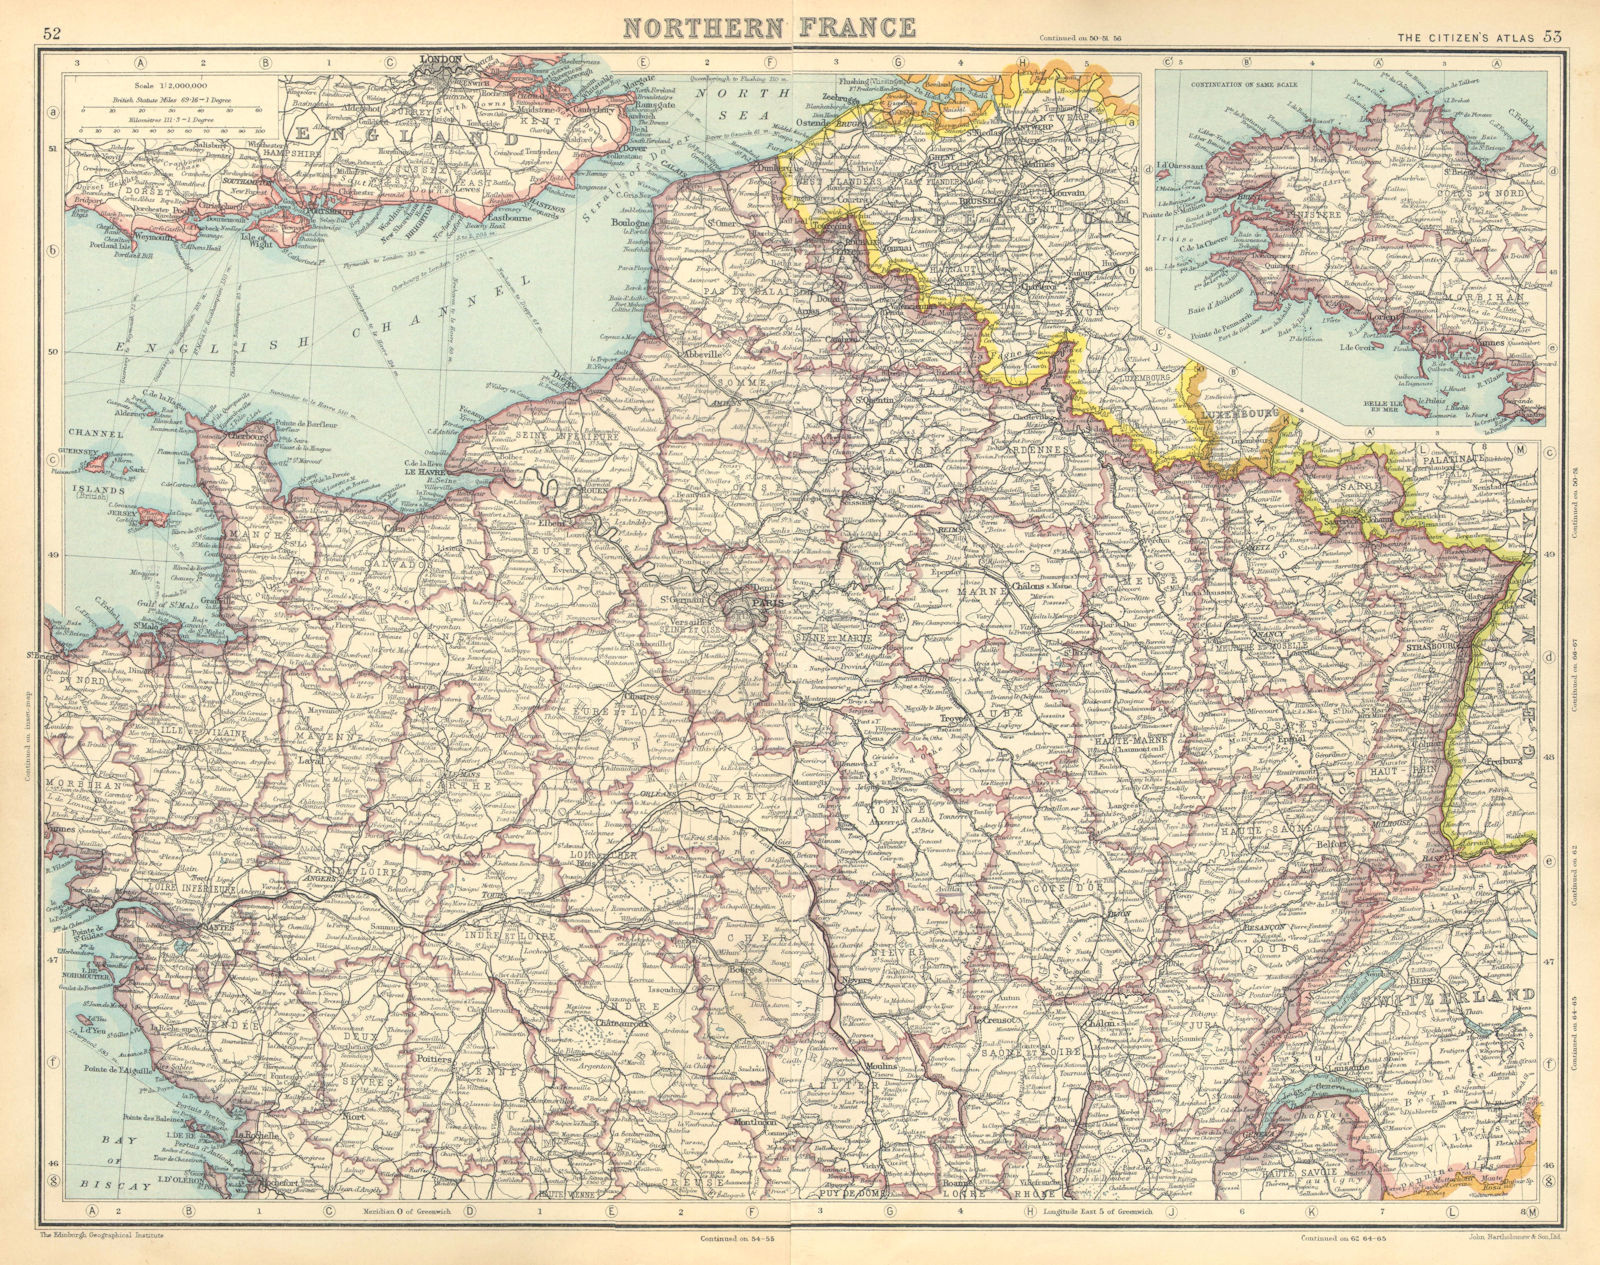 NORTHERN FRANCE. Saar Basin Territory under League of Nations mandate 1924 map